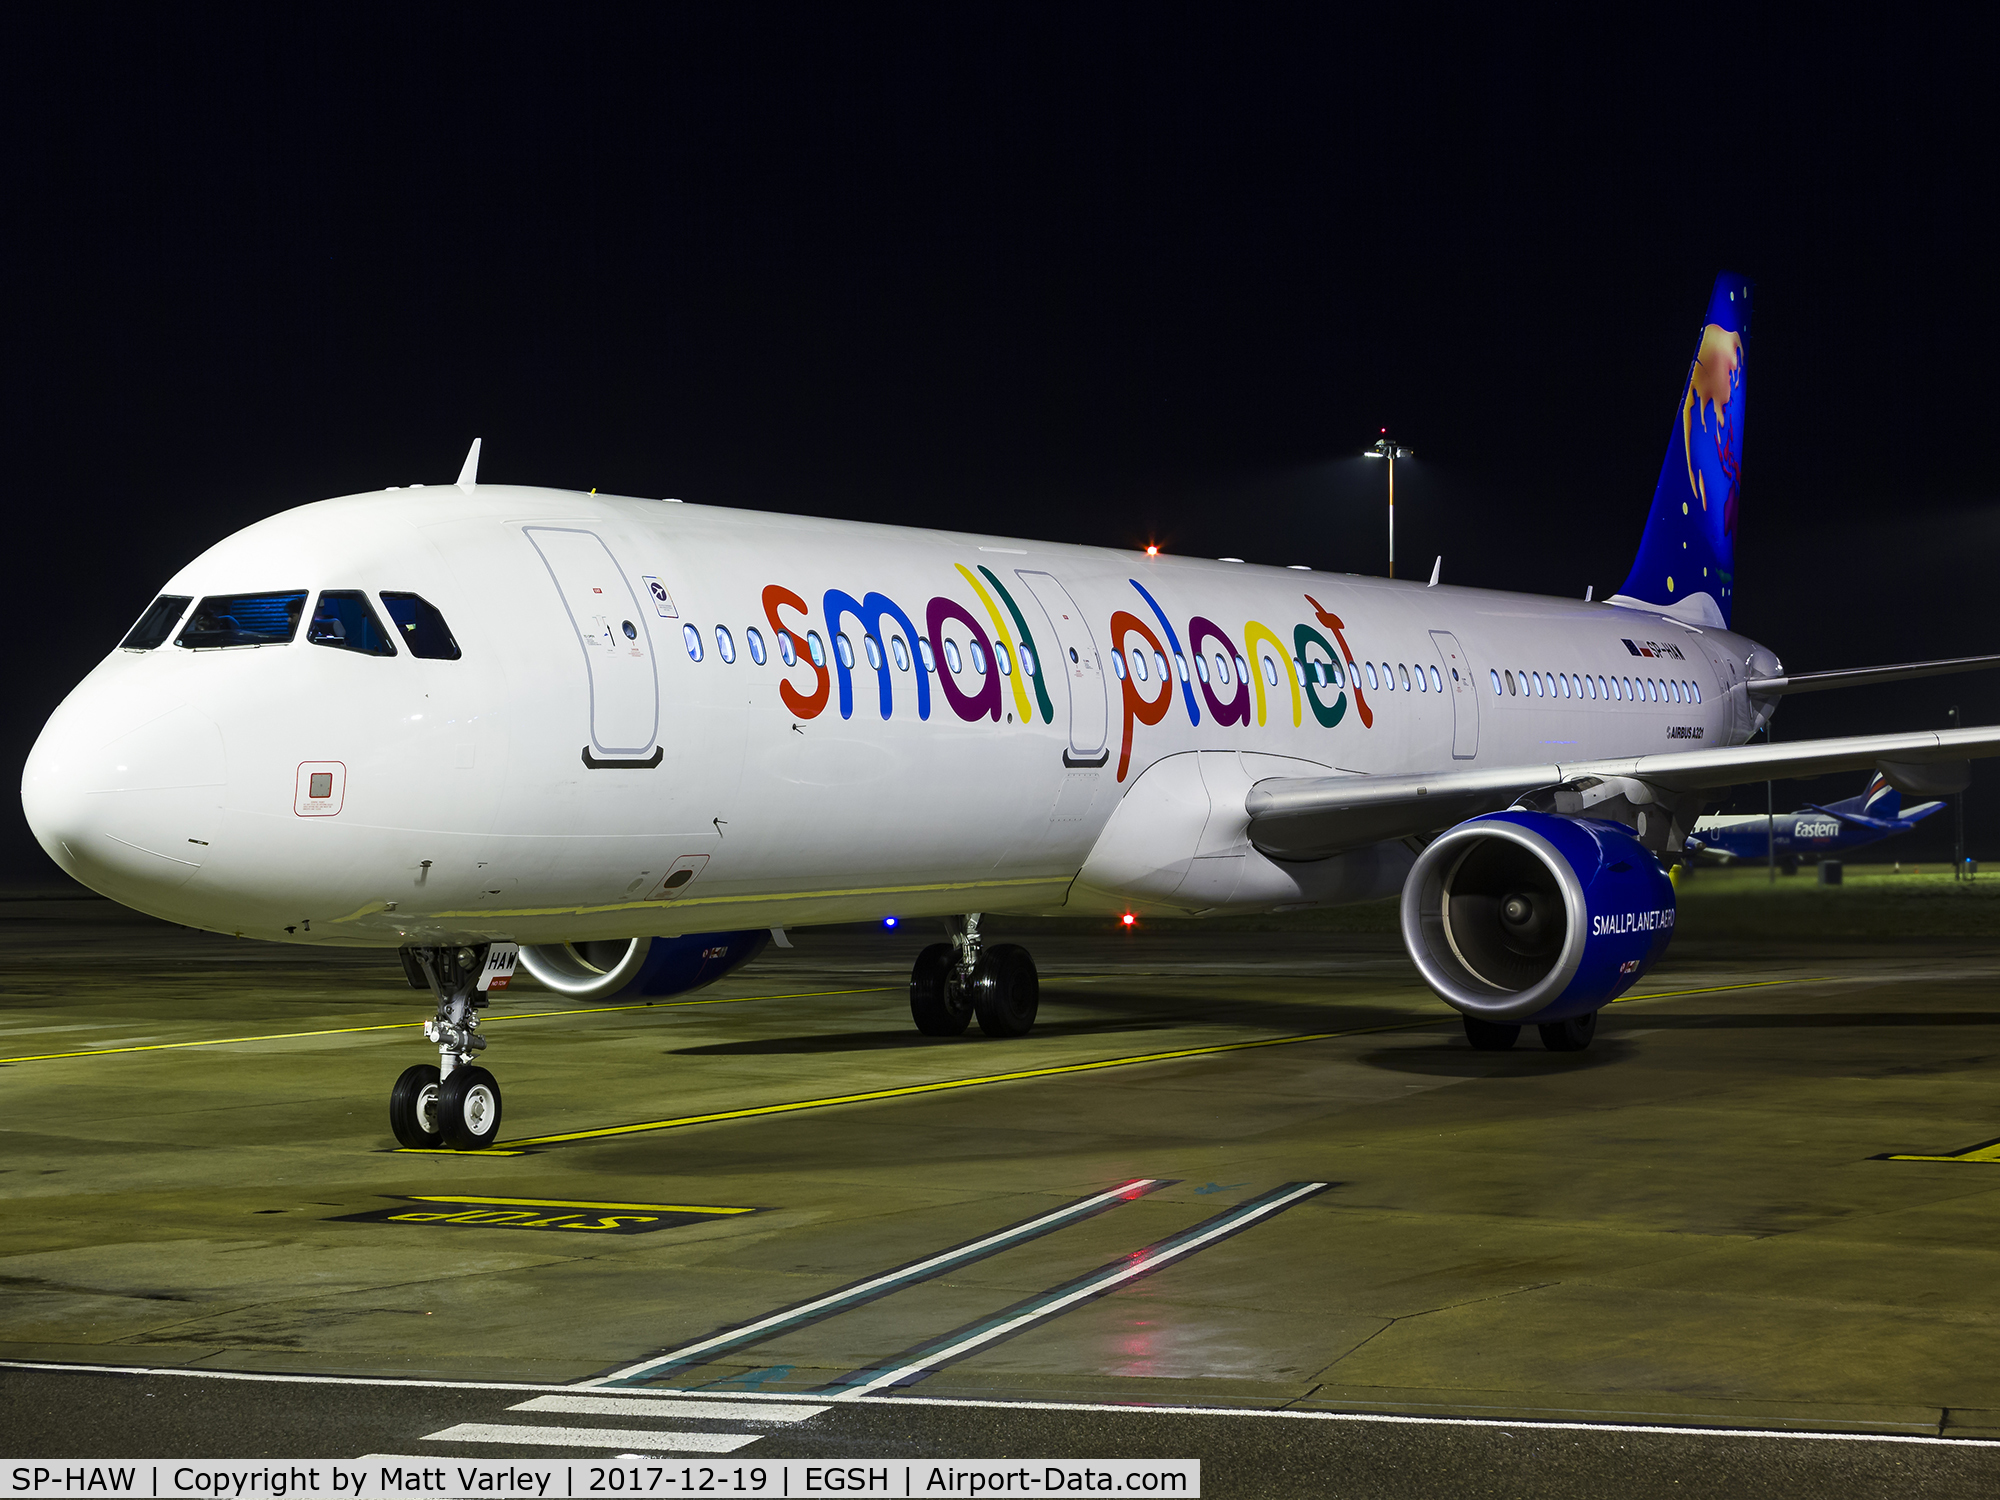 SP-HAW, 2004 Airbus A321-111 C/N 2342, Sat on stand 5 @ NWI :) :) :)